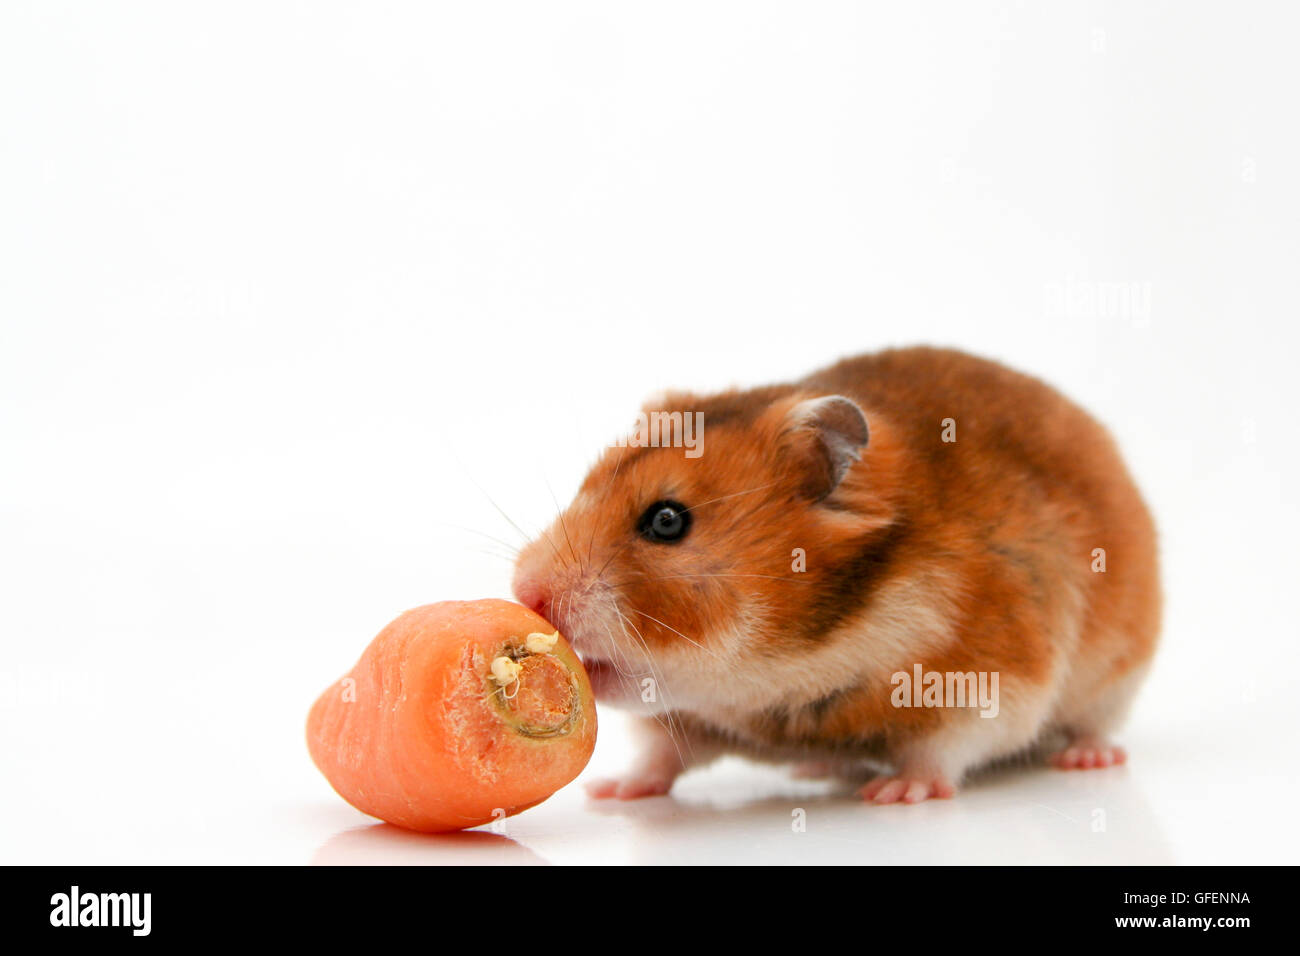 Cutout of a curious hamster and a carrot on white background Stock Photo